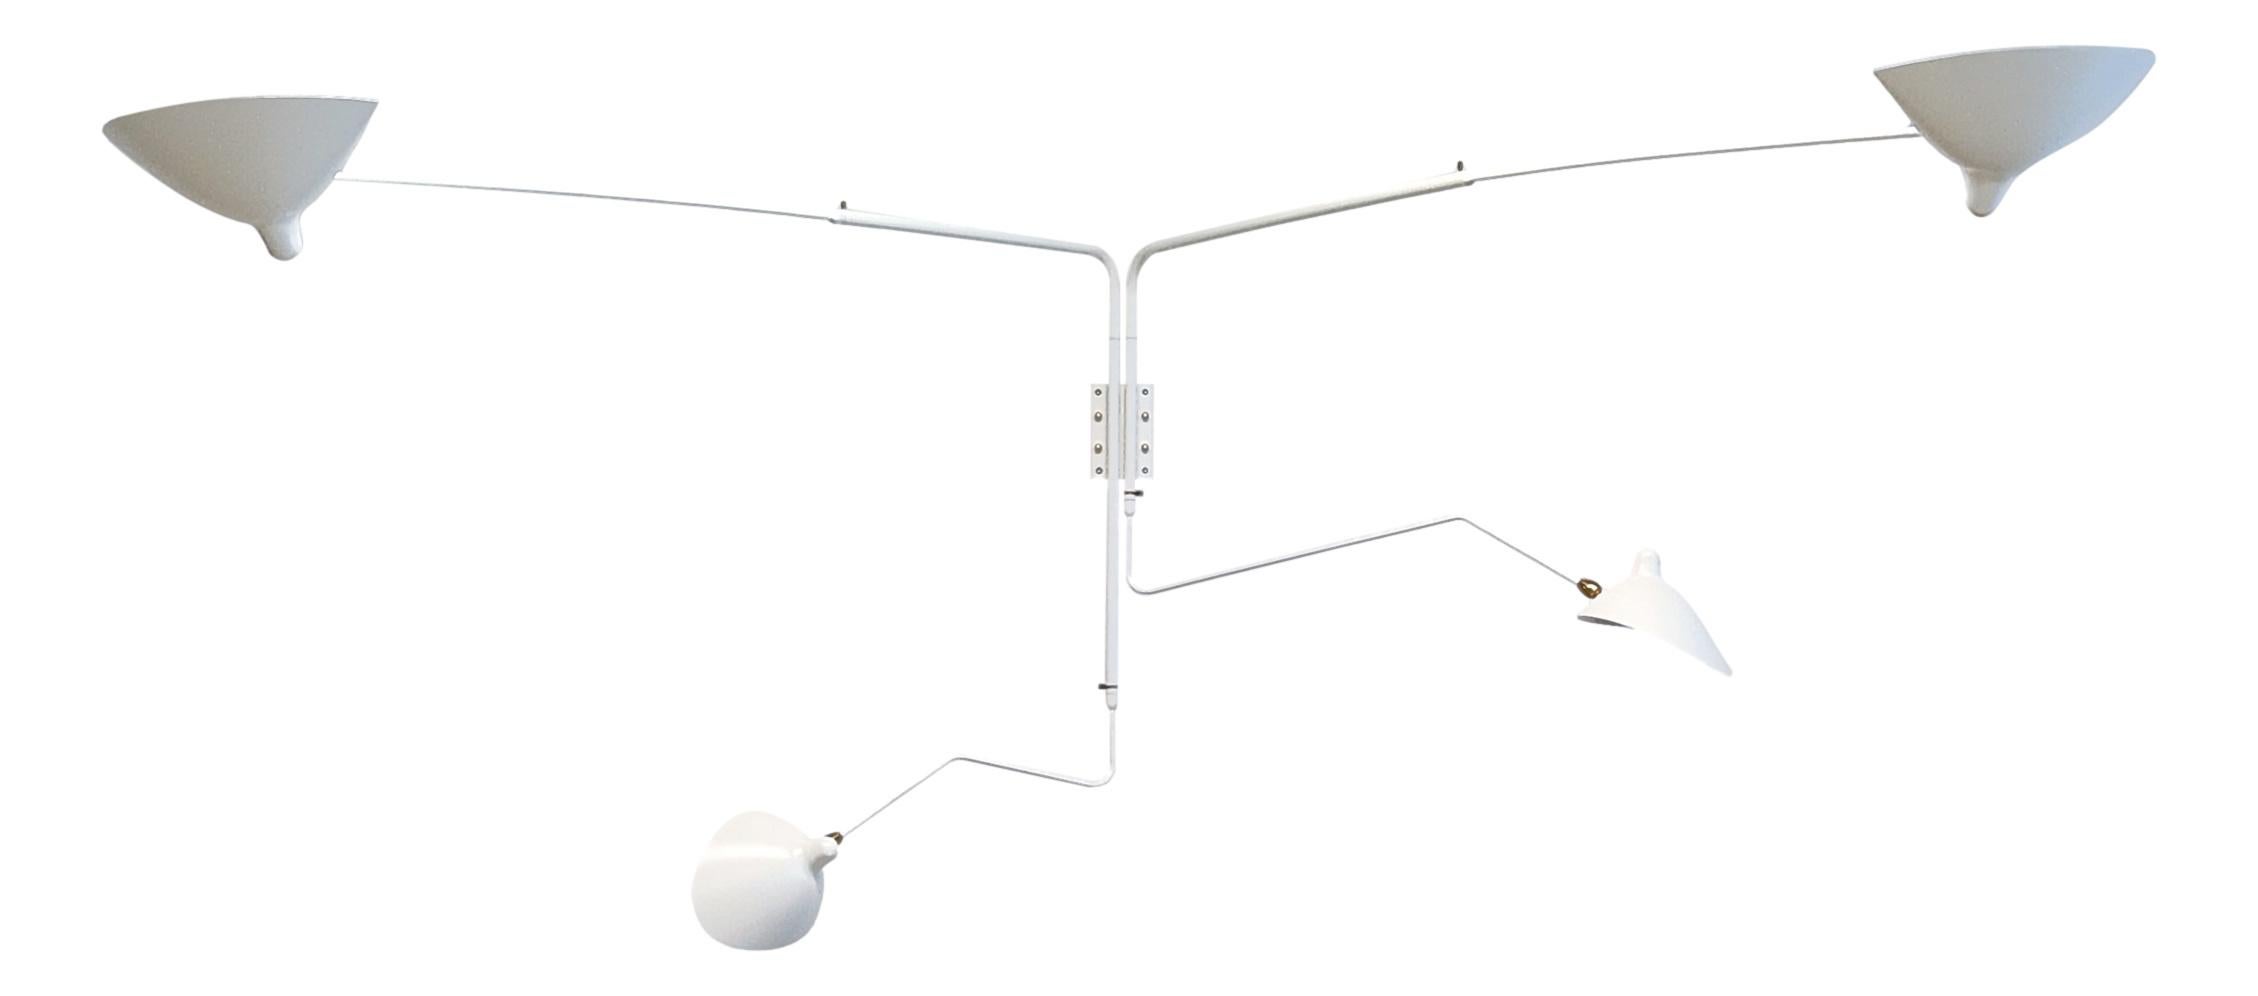 This sconce is designed so that one short and one long arm rotate at the same time creating a unique effect with illumination. Shades pivot in place. Switches located on mounting plate. Arm lengths to tip of shade 96